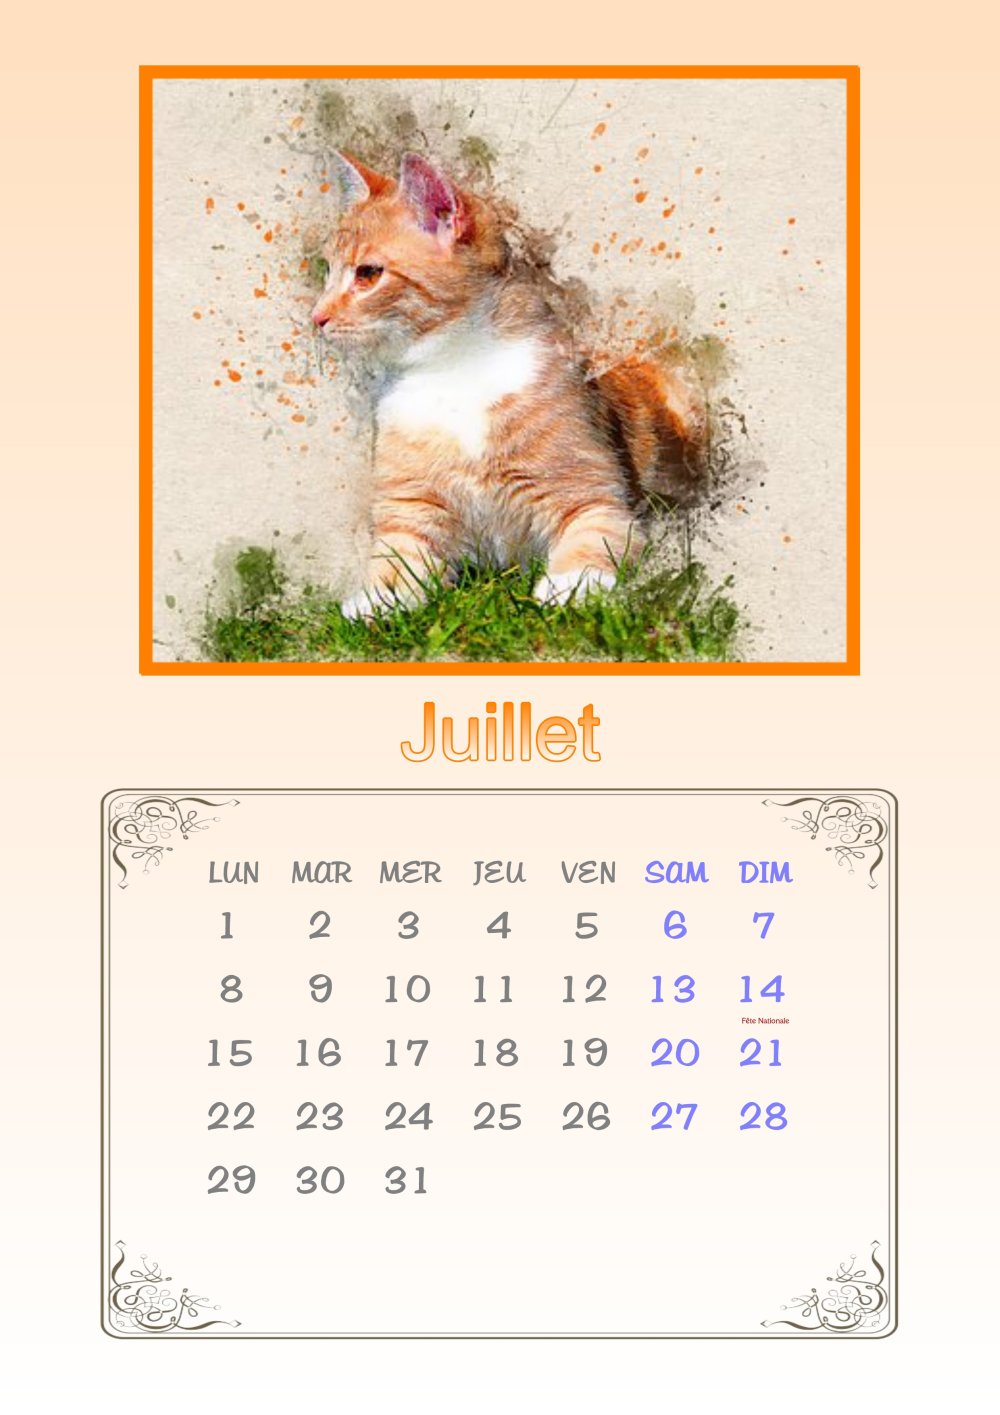 Calendrier mural 2024 chat, calendrier chat, impression de chat